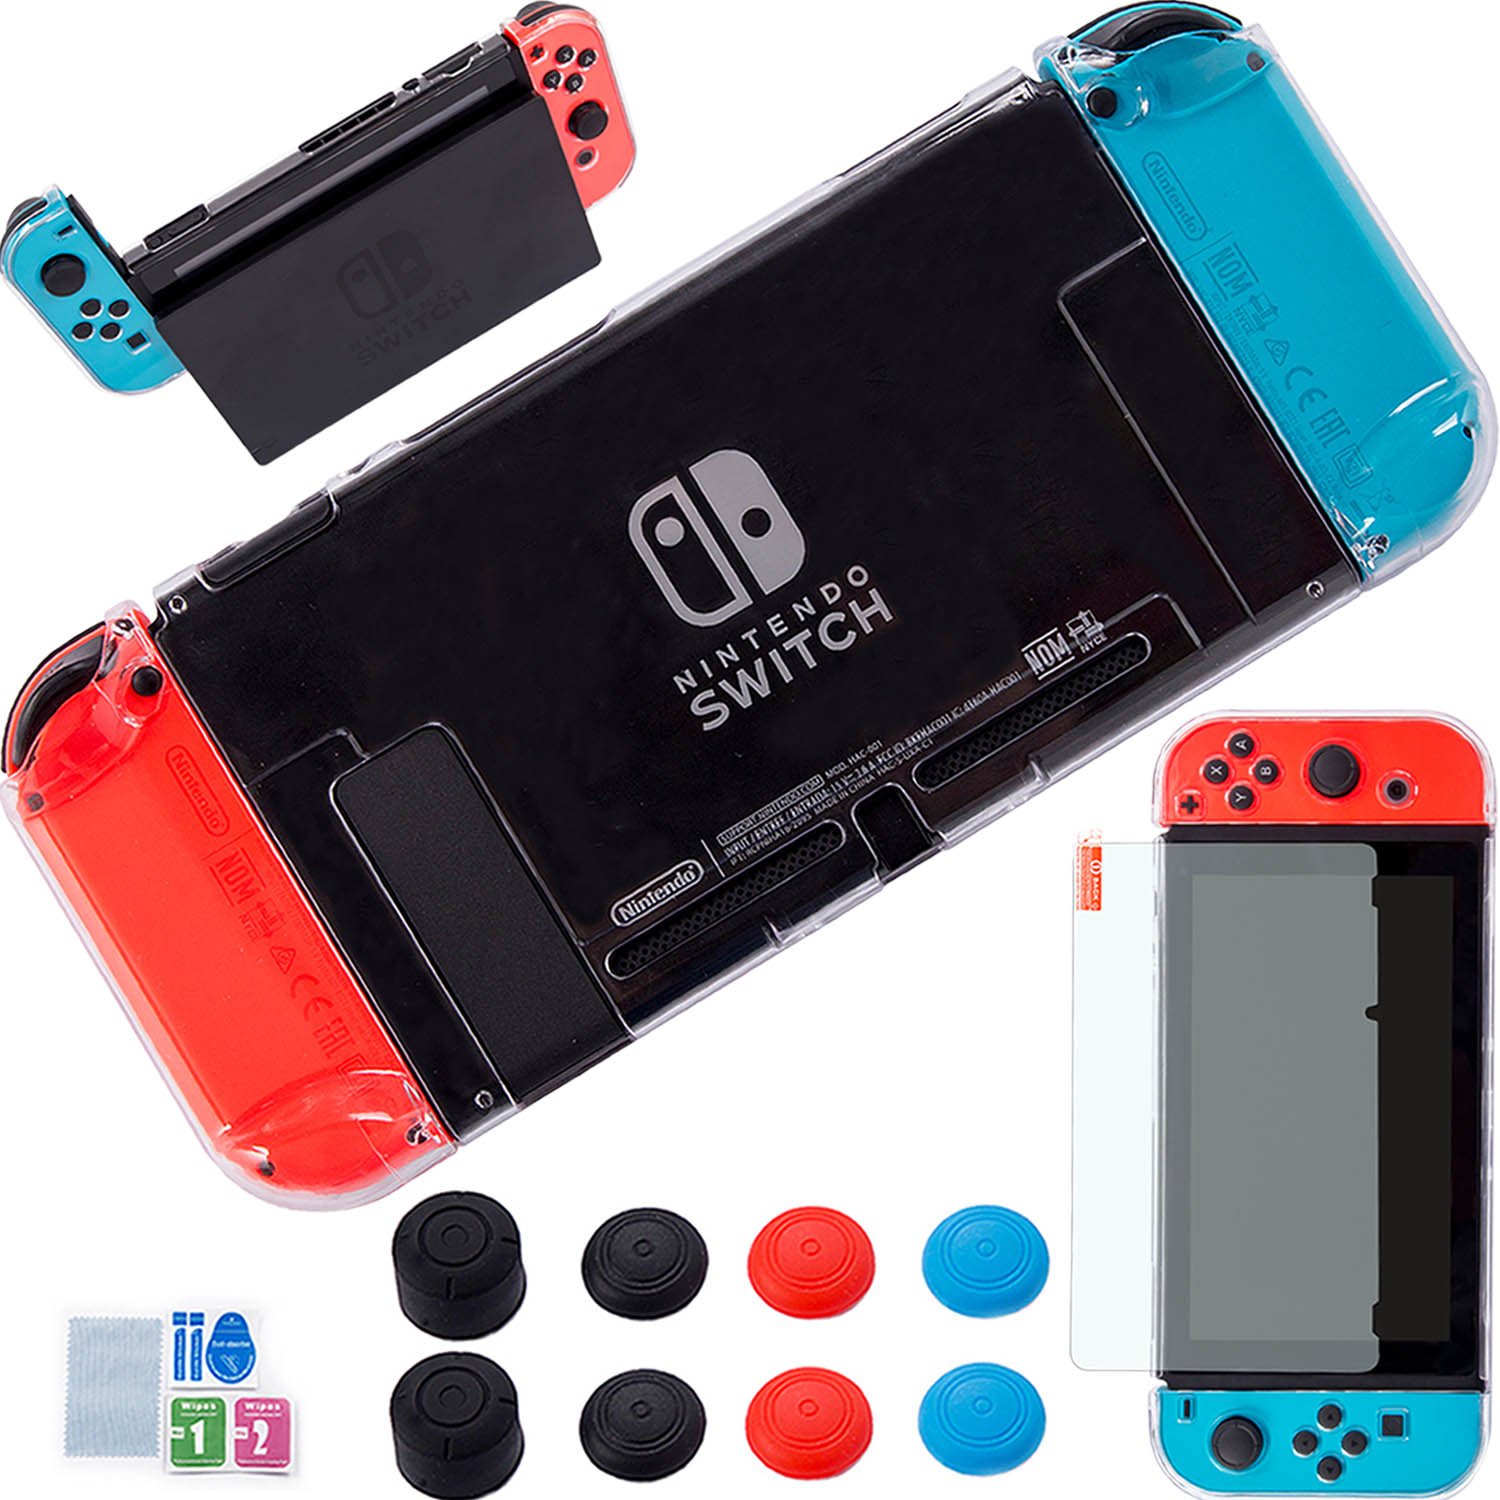 Book Cover YOOWA 3 in 1 Nintendo Switch Dockable Case - [Newest Version] Clear Protective Cover Case for Nintendo Switch and Joy-Con Controllers w/8 Thumb Grips Caps and Nintendo Switch Screen Protector - Clear